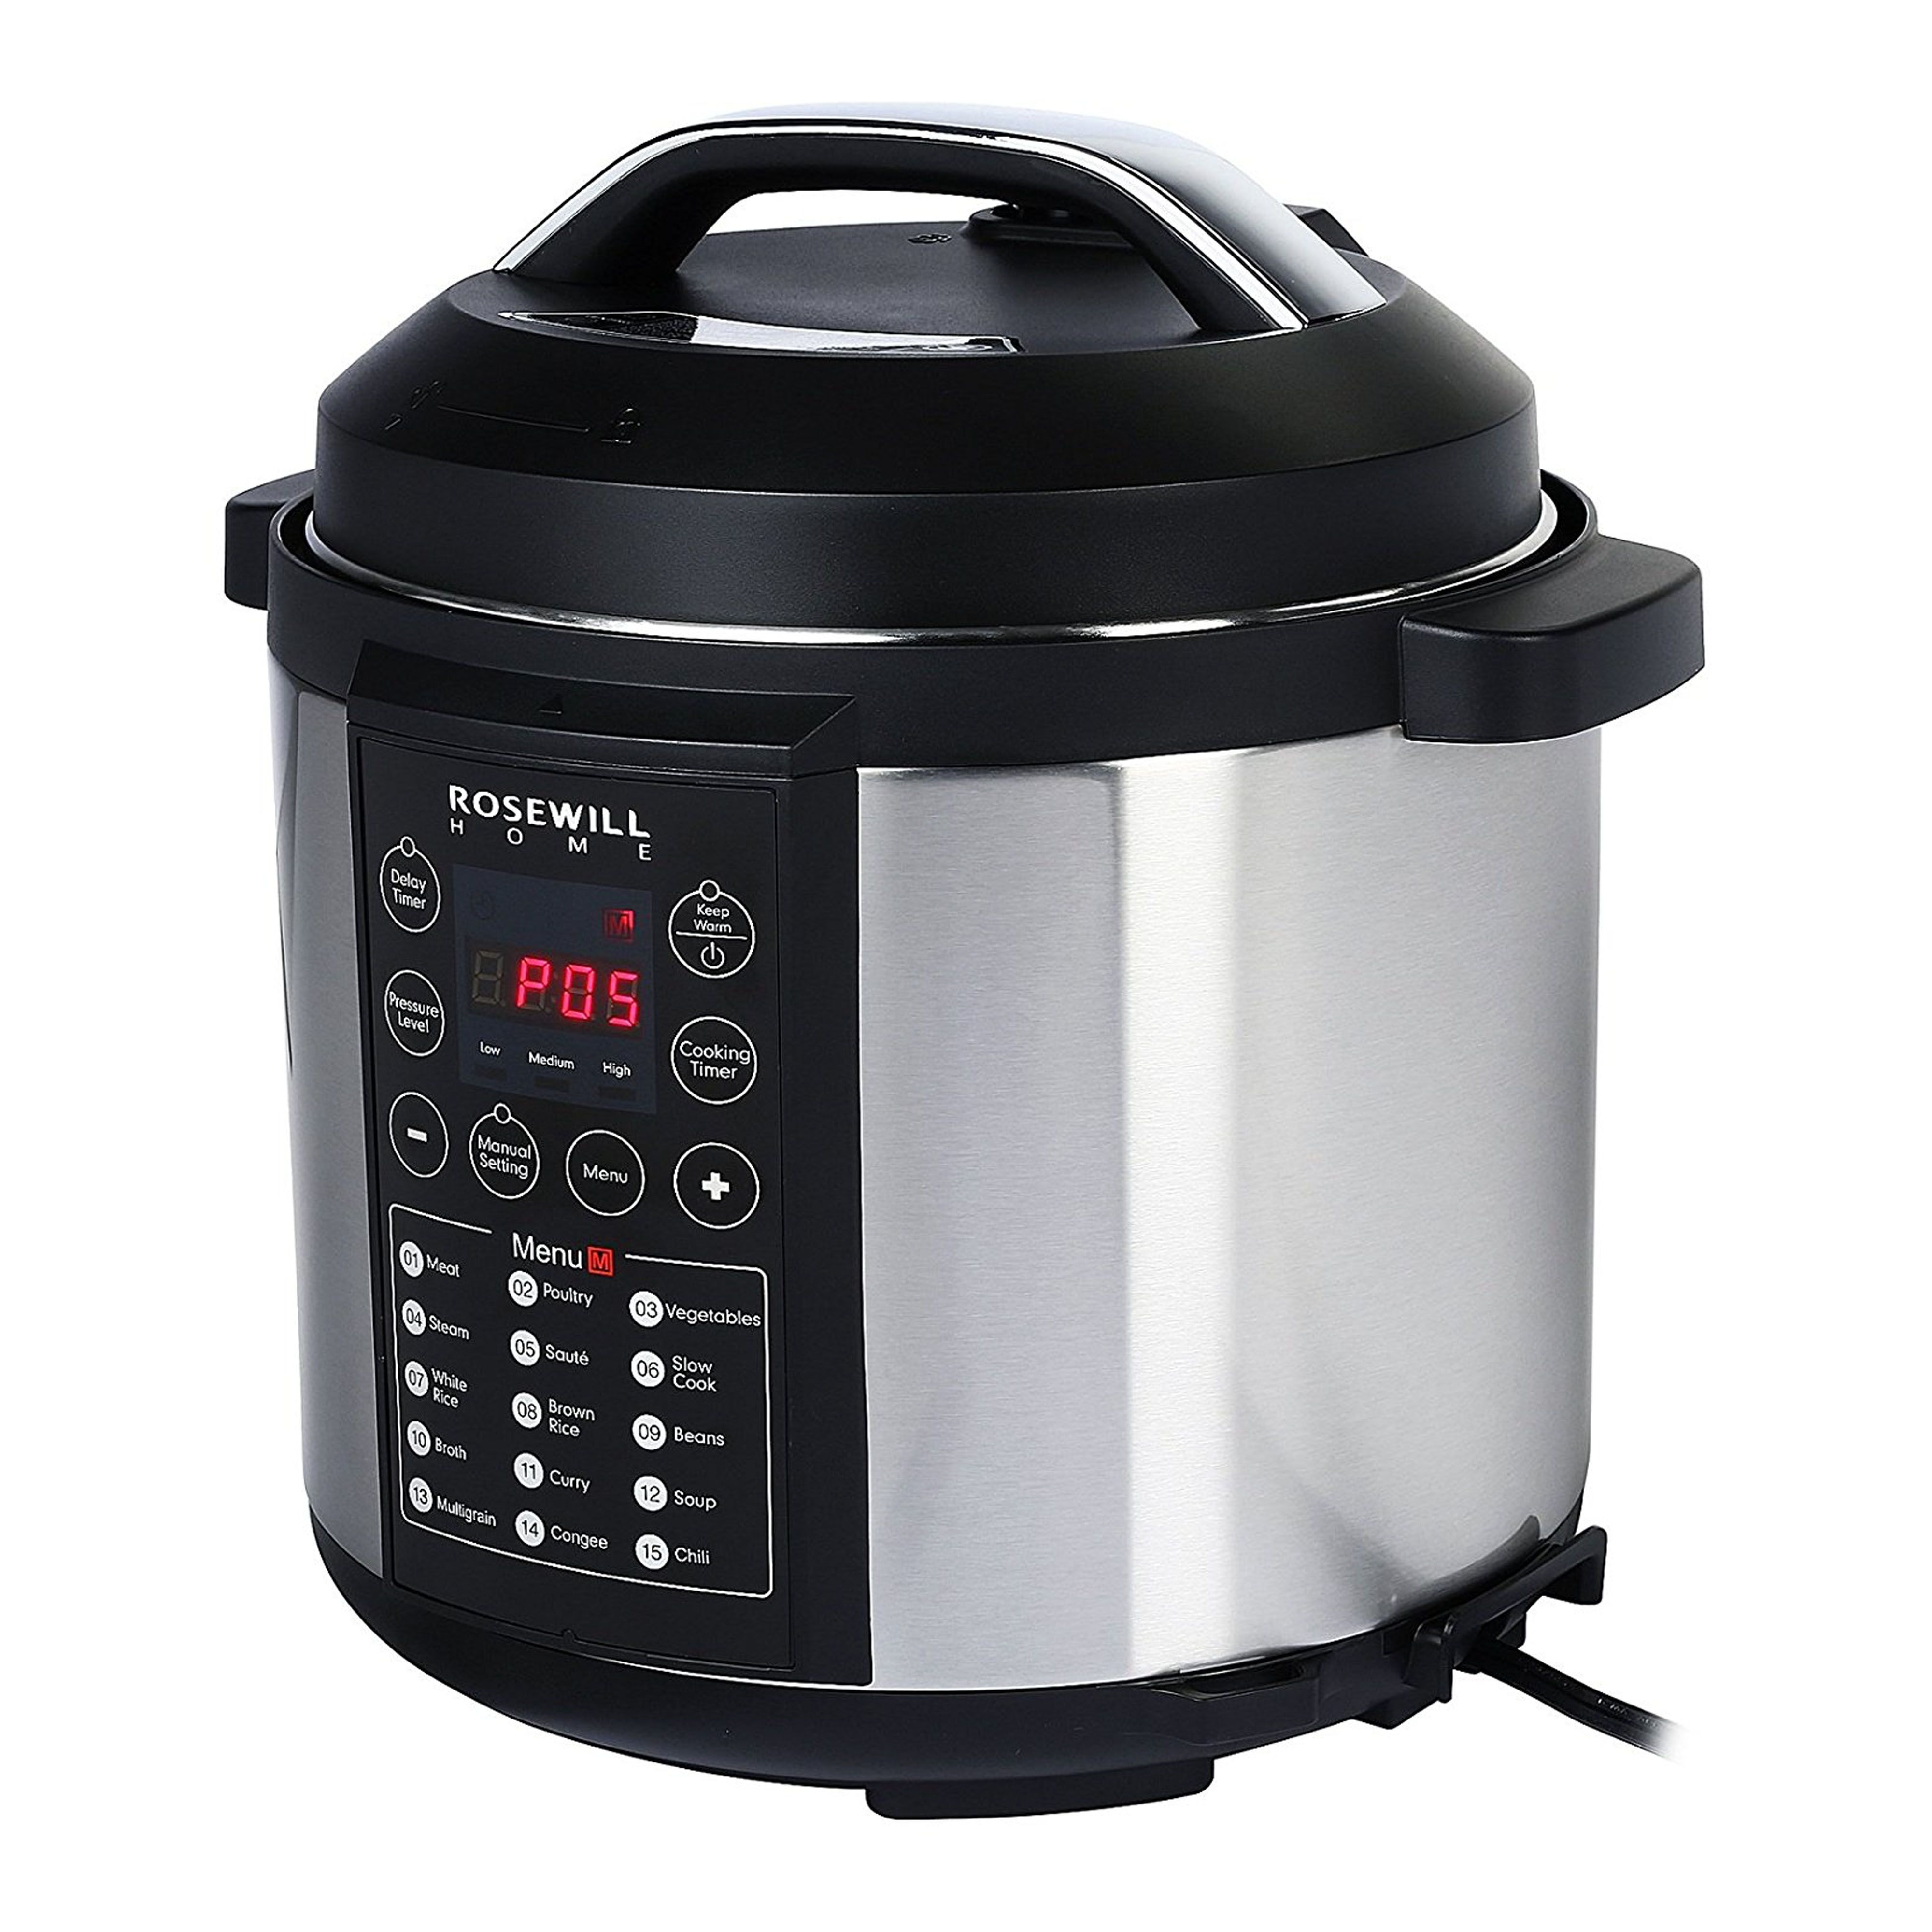 https://hips.hearstapps.com/goodhousekeeping/assets/17/01/1483568011-rosewill-6l-electric-pressure-cooker-rhpc-15002.jpg